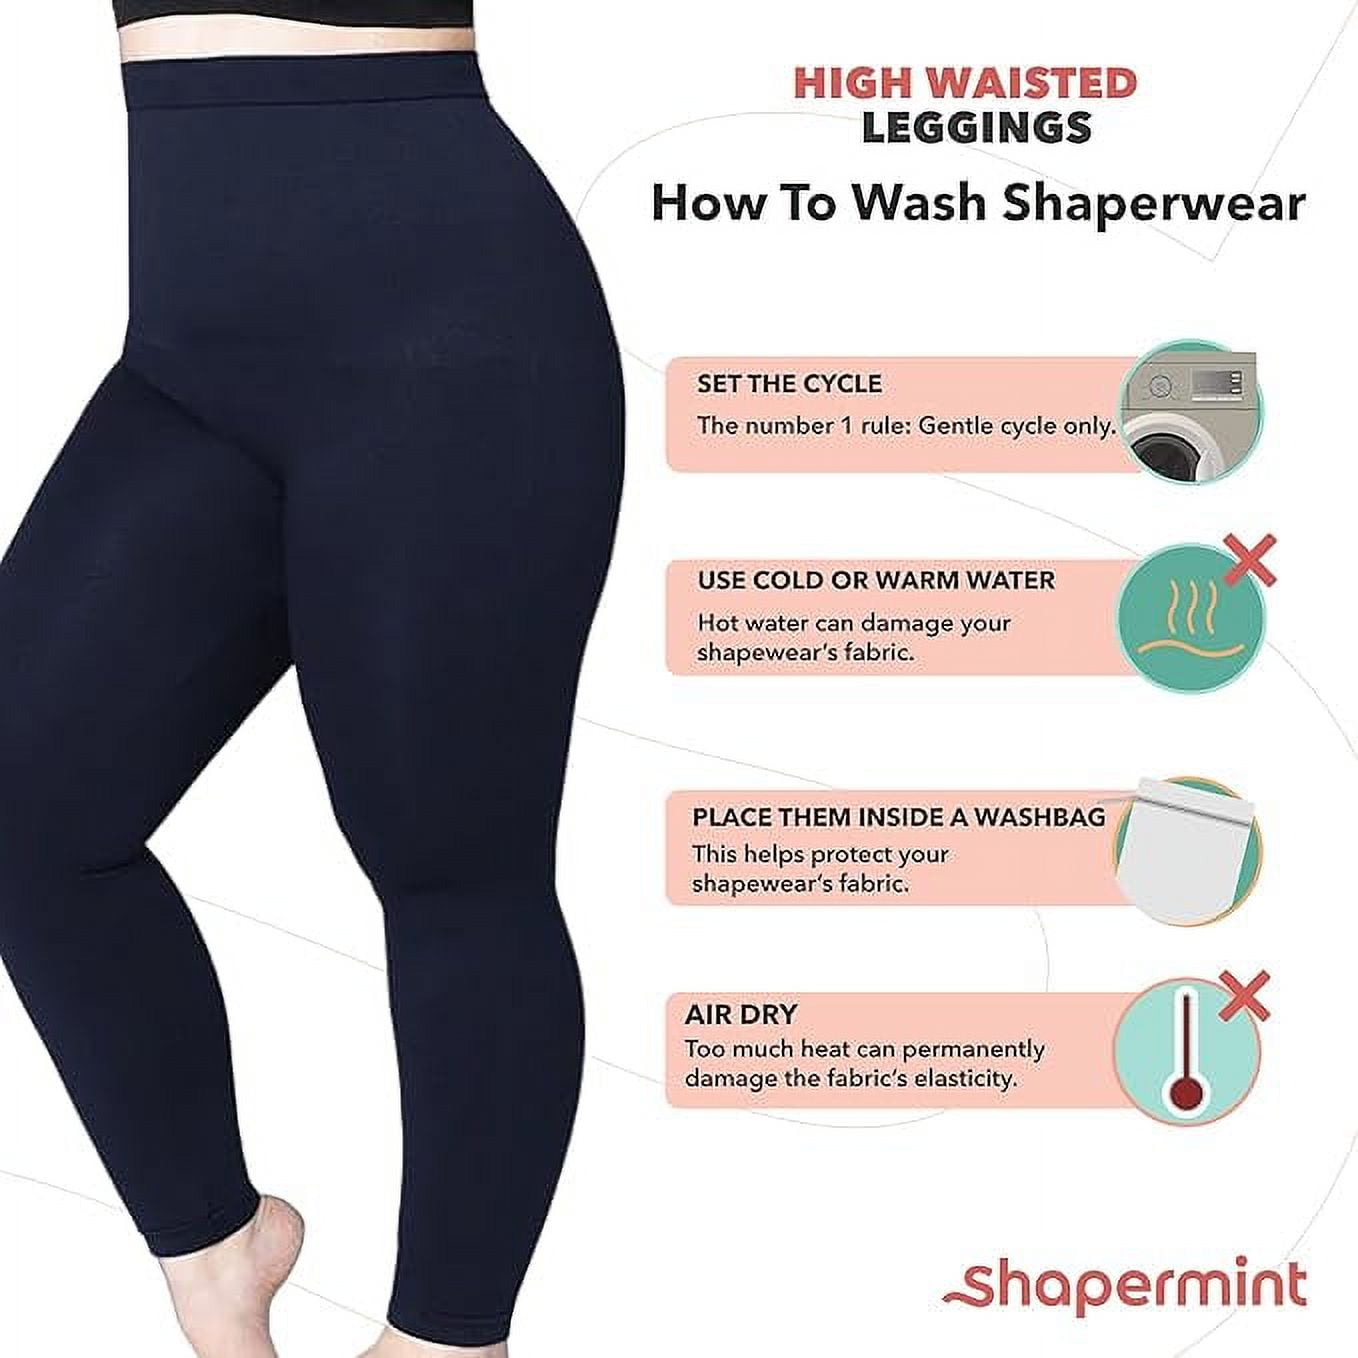 Get ready to work that magic with our waist-shaper leggings! ✨Say